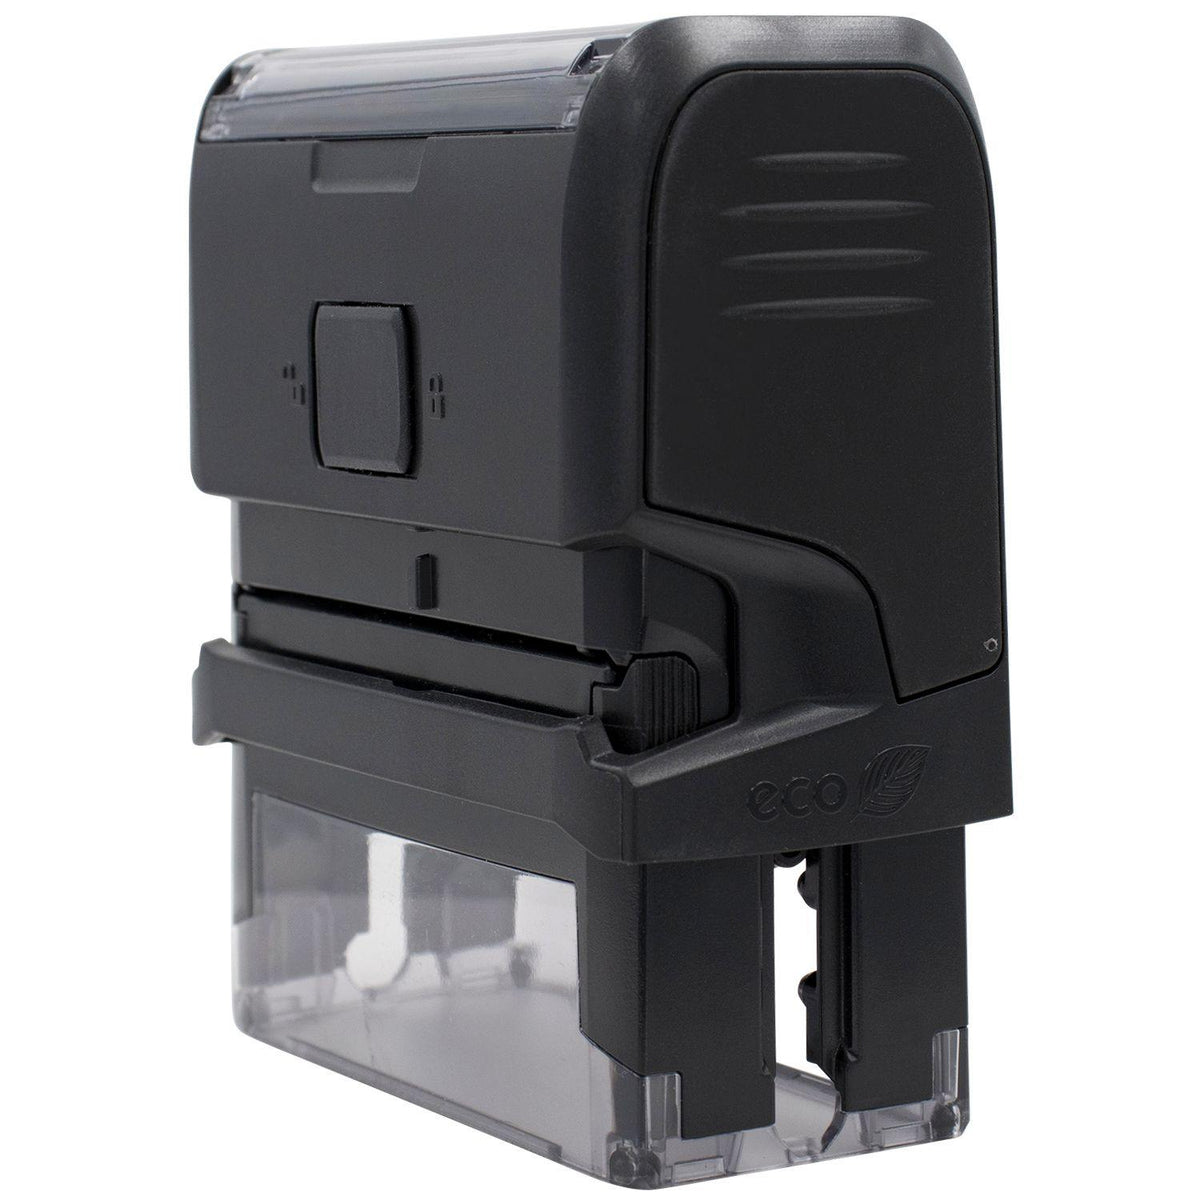 Large Self-Inking Narrow Font Court Copy Stamp - Engineer Seal Stamps - Brand_Trodat, Impression Size_Large, Stamp Type_Self-Inking Stamp, Type of Use_Legal